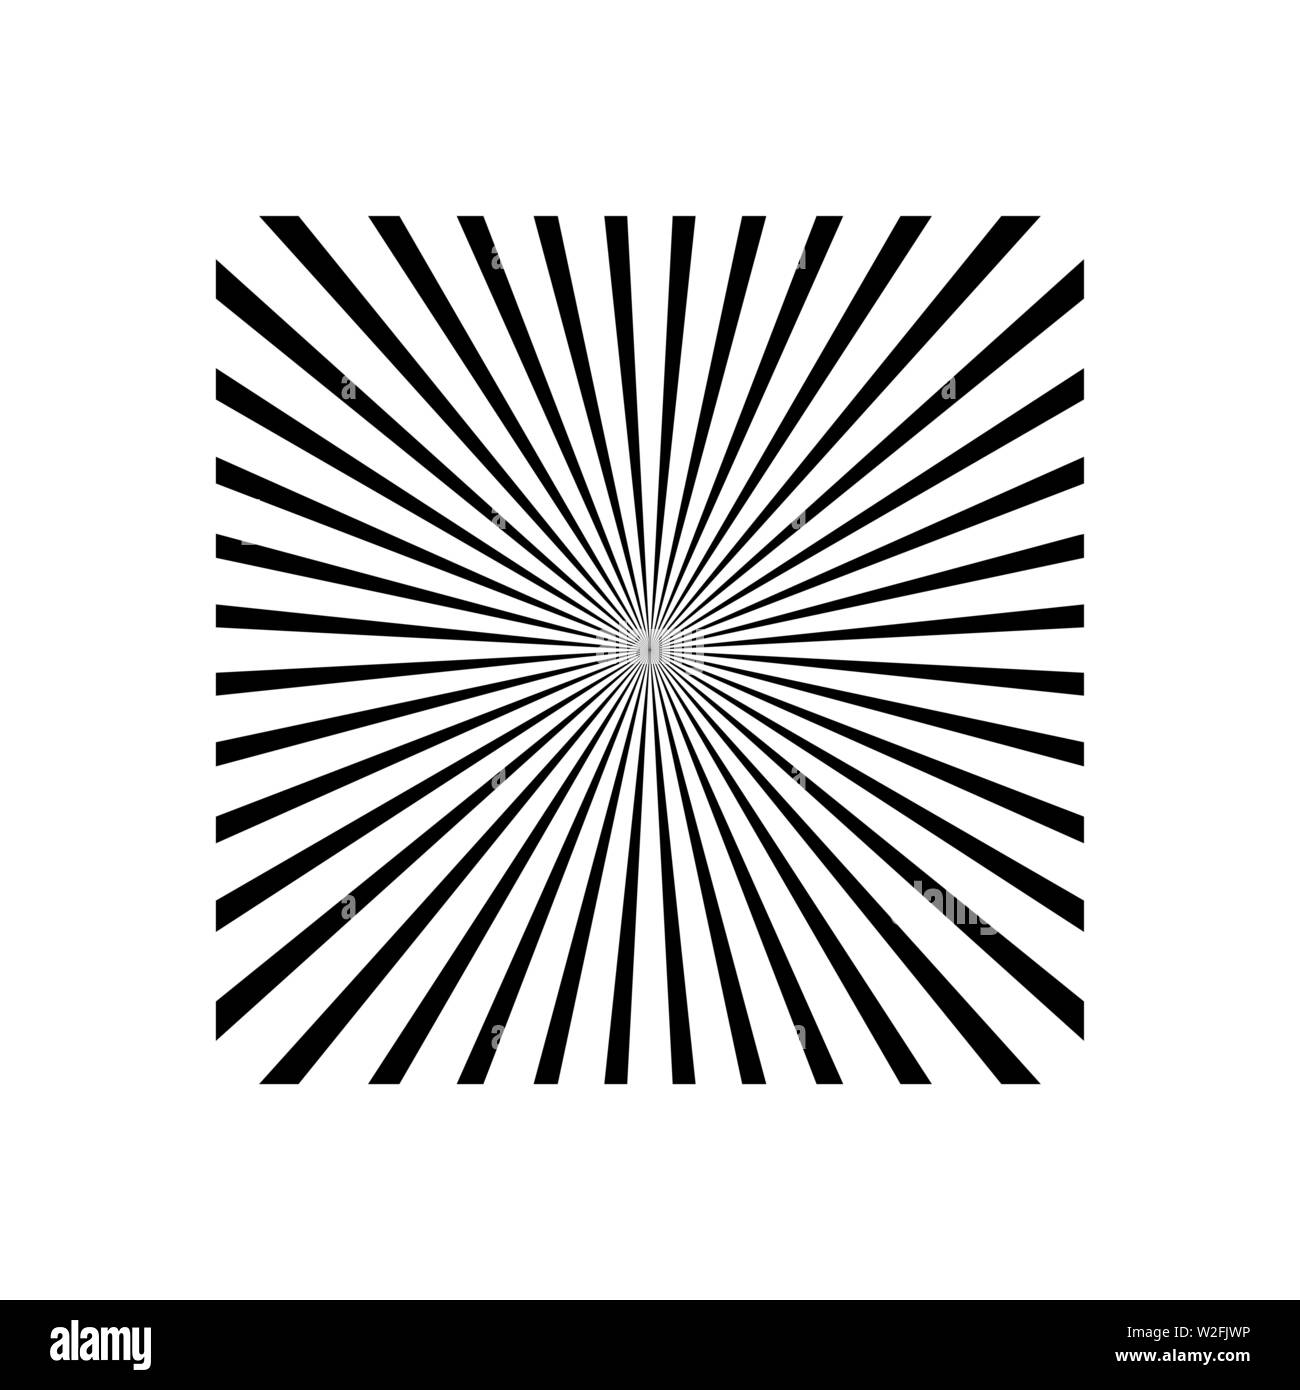 Black and white radial lines optical illusion vector graphic Stock Vector